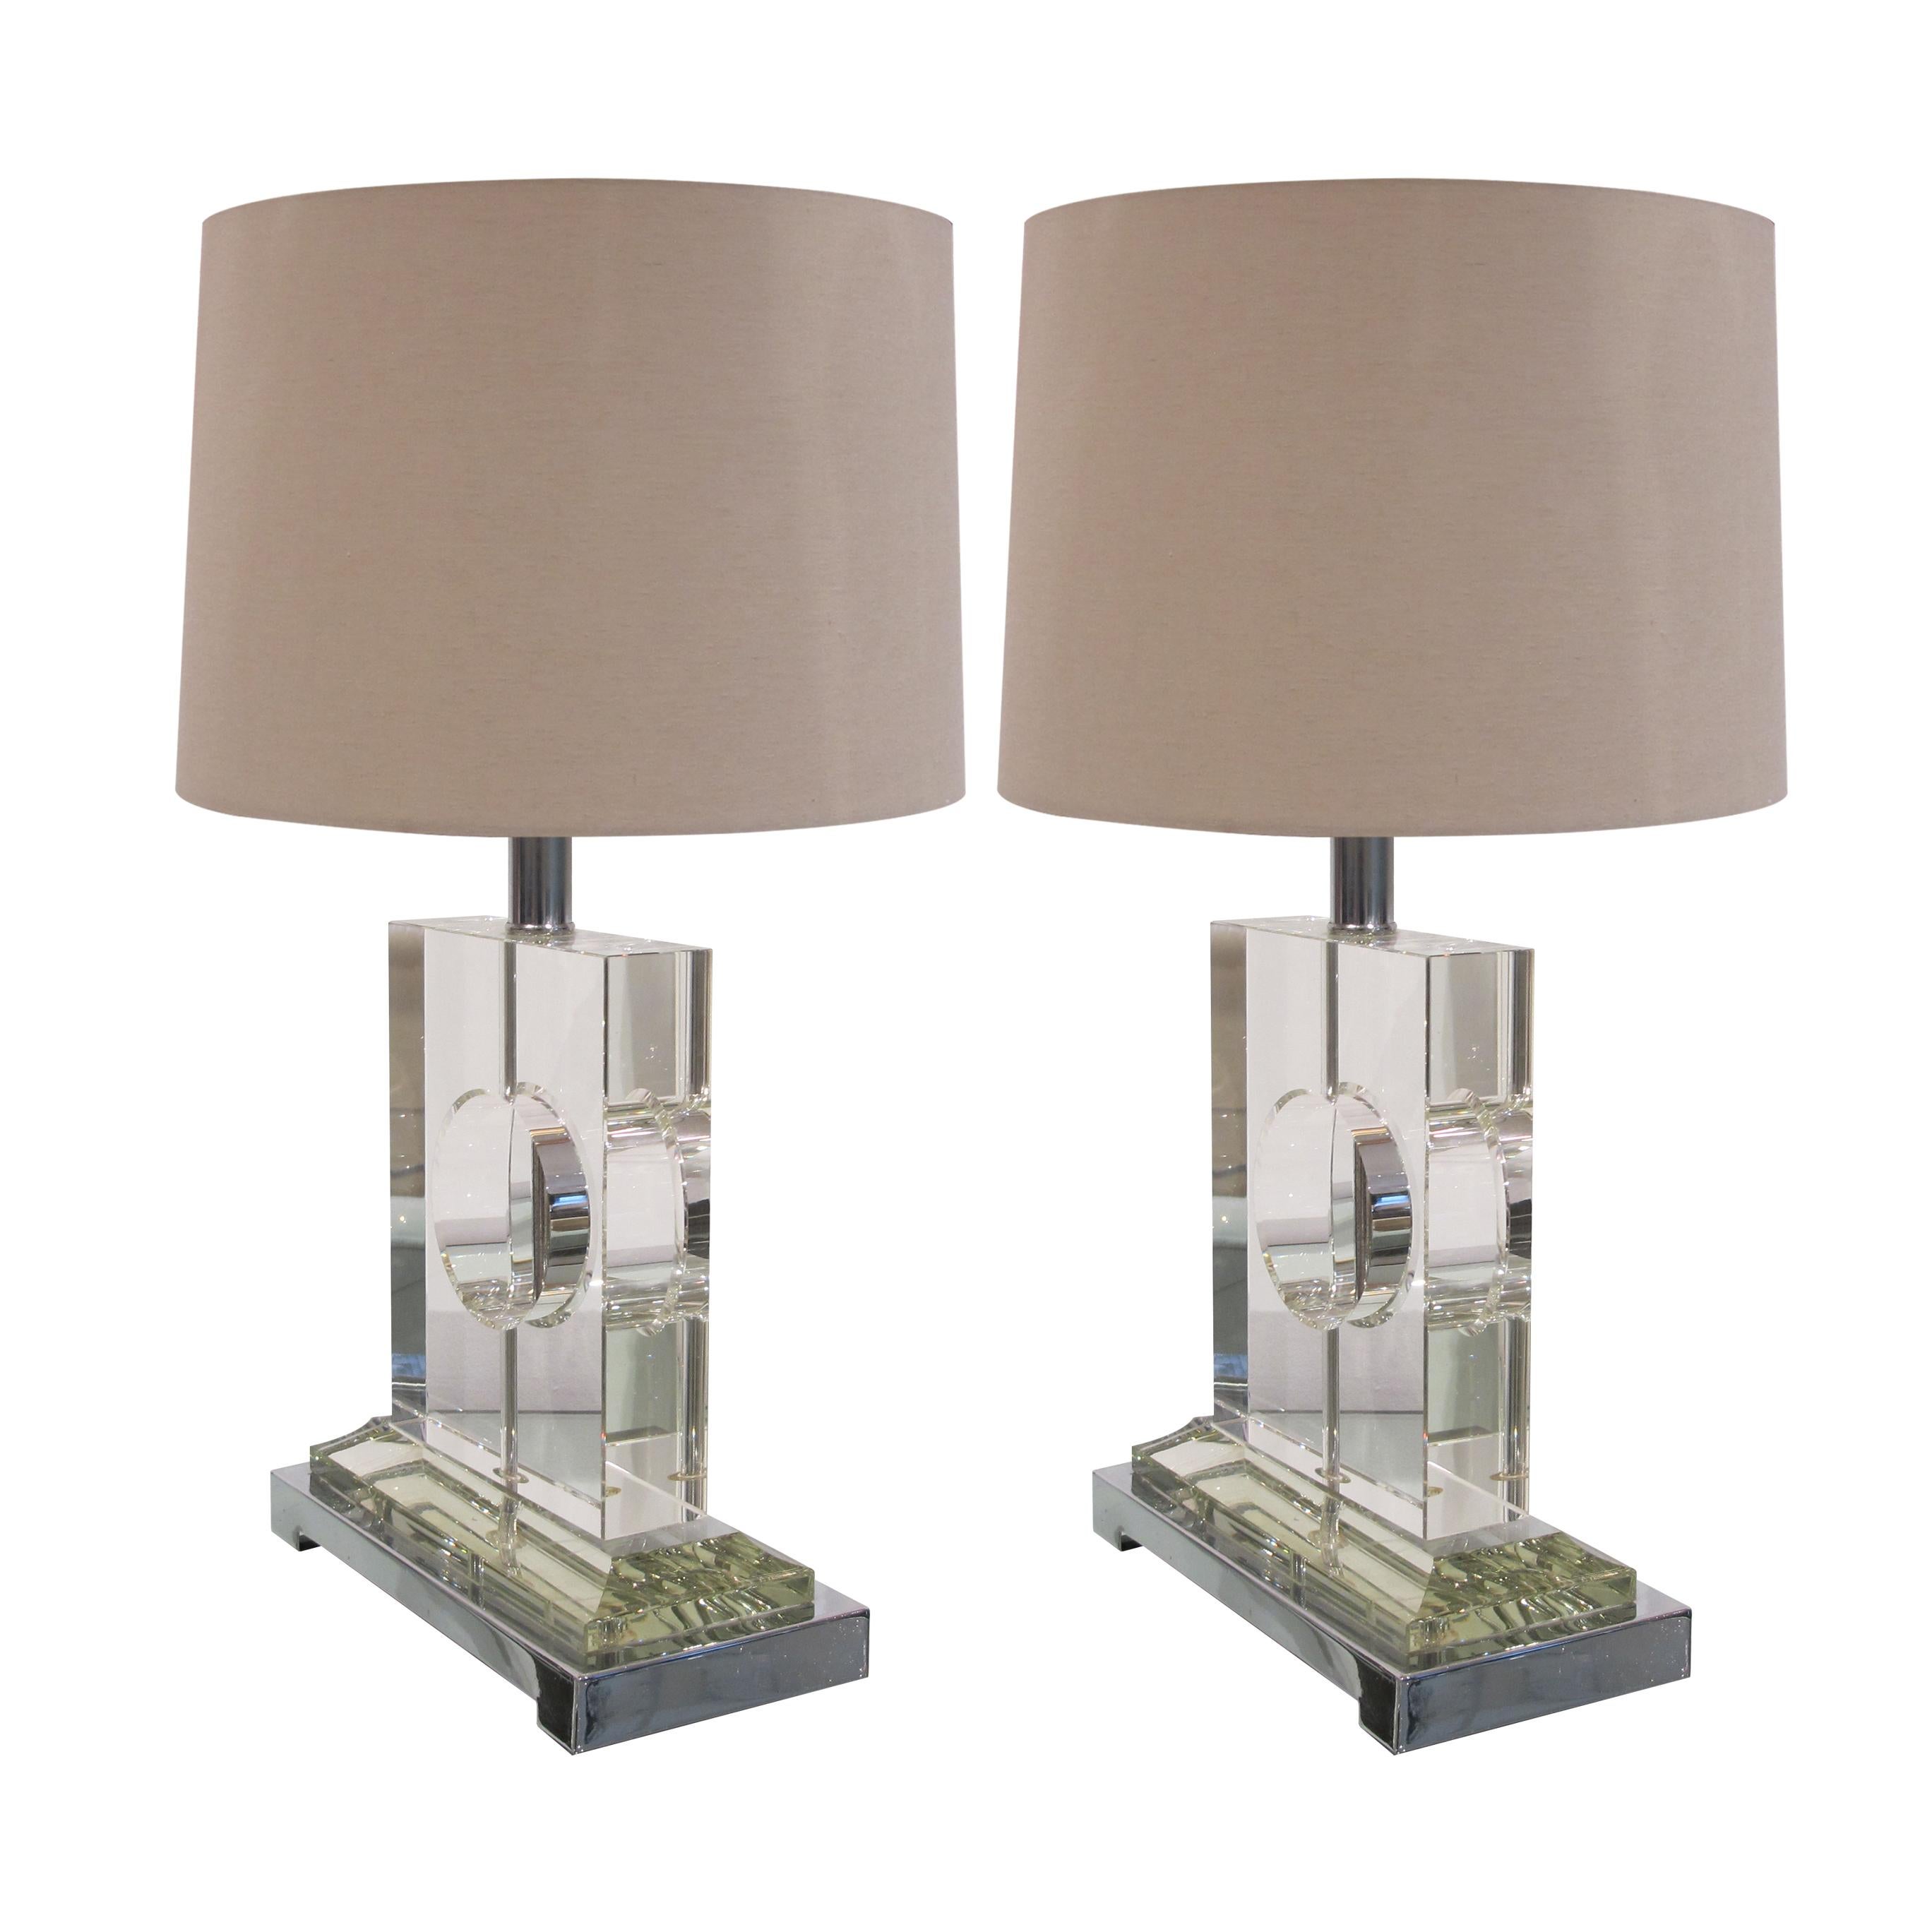 A stylish pair of Italian glass table lamps mounted on a rectangular chrome plated base. The lamps are of simple elegant design with a central chrome stem exposed through the centre of the circle. The lamps have been recently rewired. 

Size: H 37